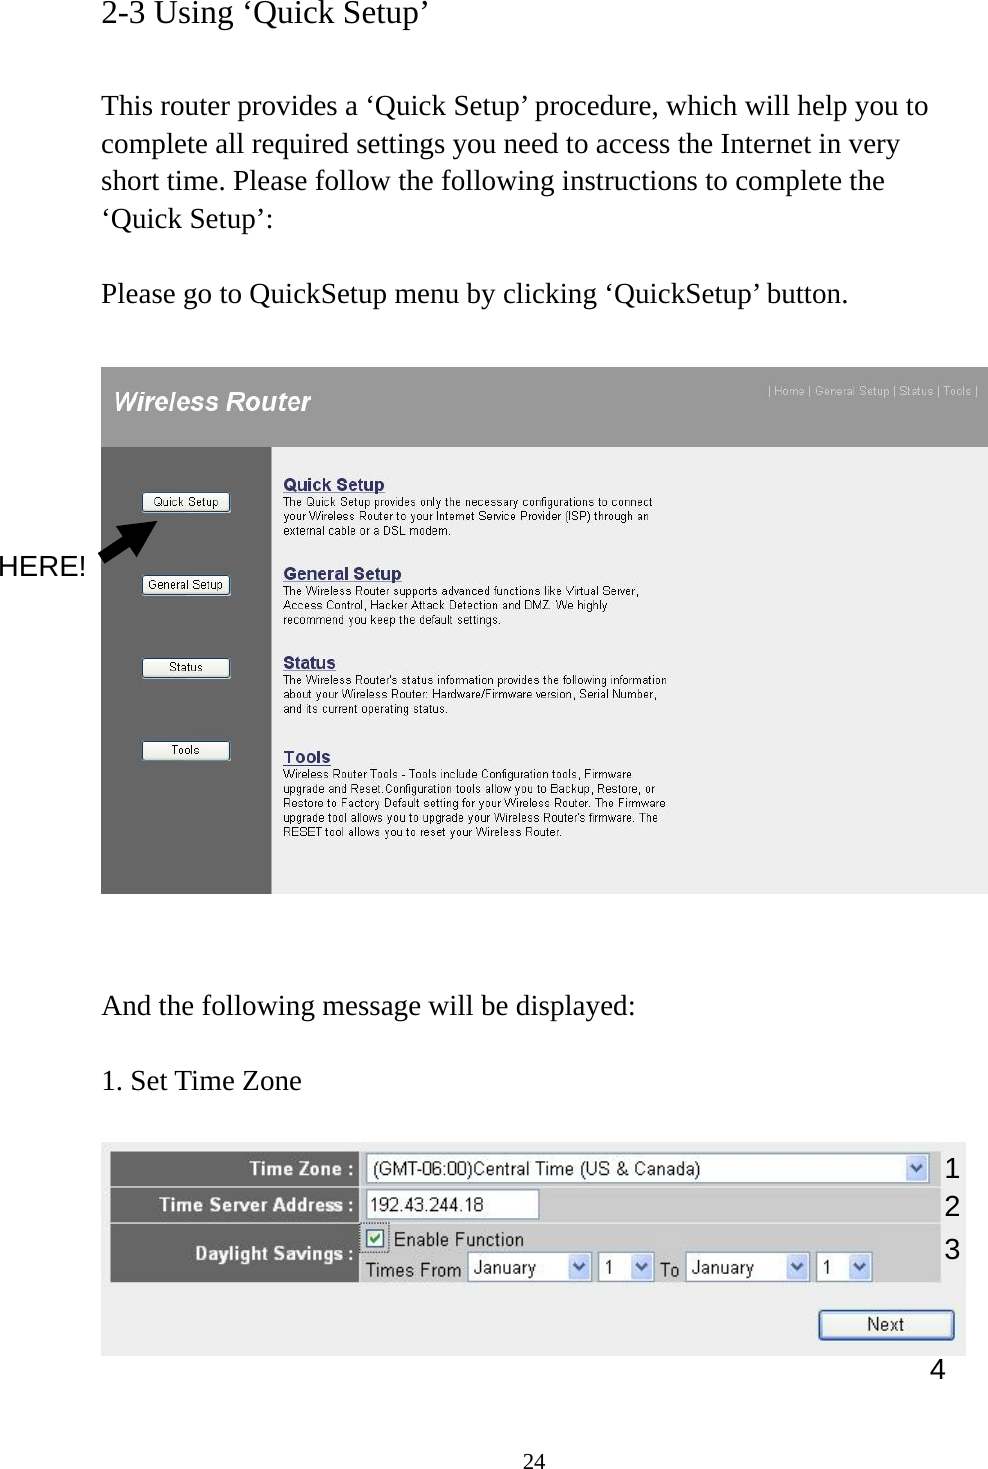 24 2-3 Using ‘Quick Setup’  This router provides a ‘Quick Setup’ procedure, which will help you to complete all required settings you need to access the Internet in very short time. Please follow the following instructions to complete the ‘Quick Setup’:  Please go to QuickSetup menu by clicking ‘QuickSetup’ button.     And the following message will be displayed:  1. Set Time Zone   1234 HERE! 